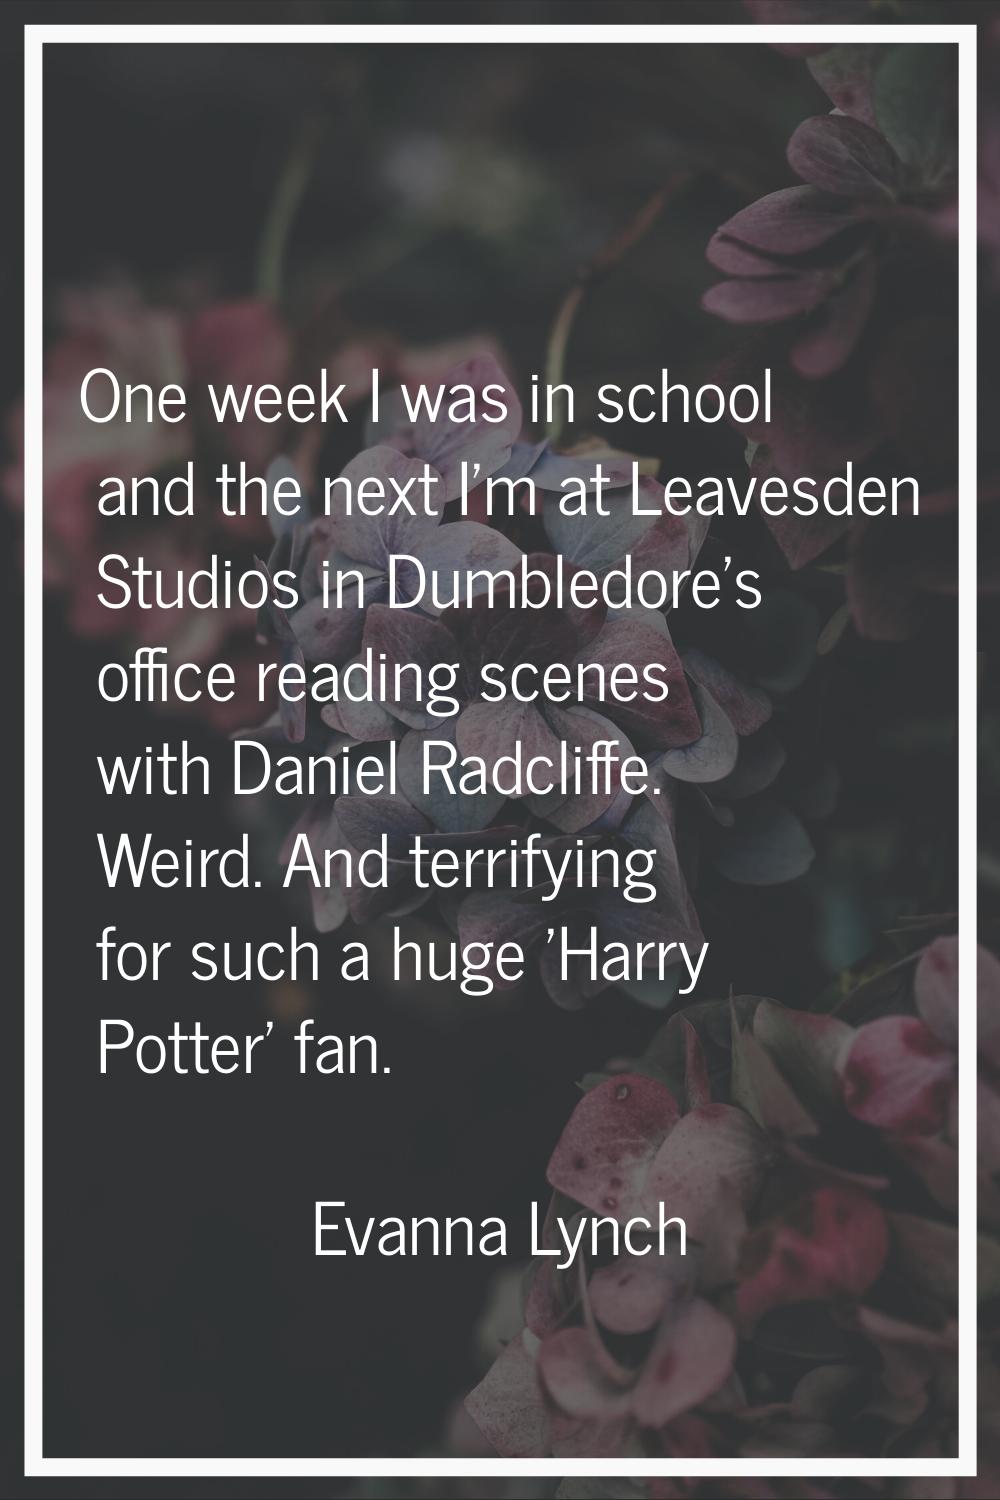 One week I was in school and the next I'm at Leavesden Studios in Dumbledore's office reading scene